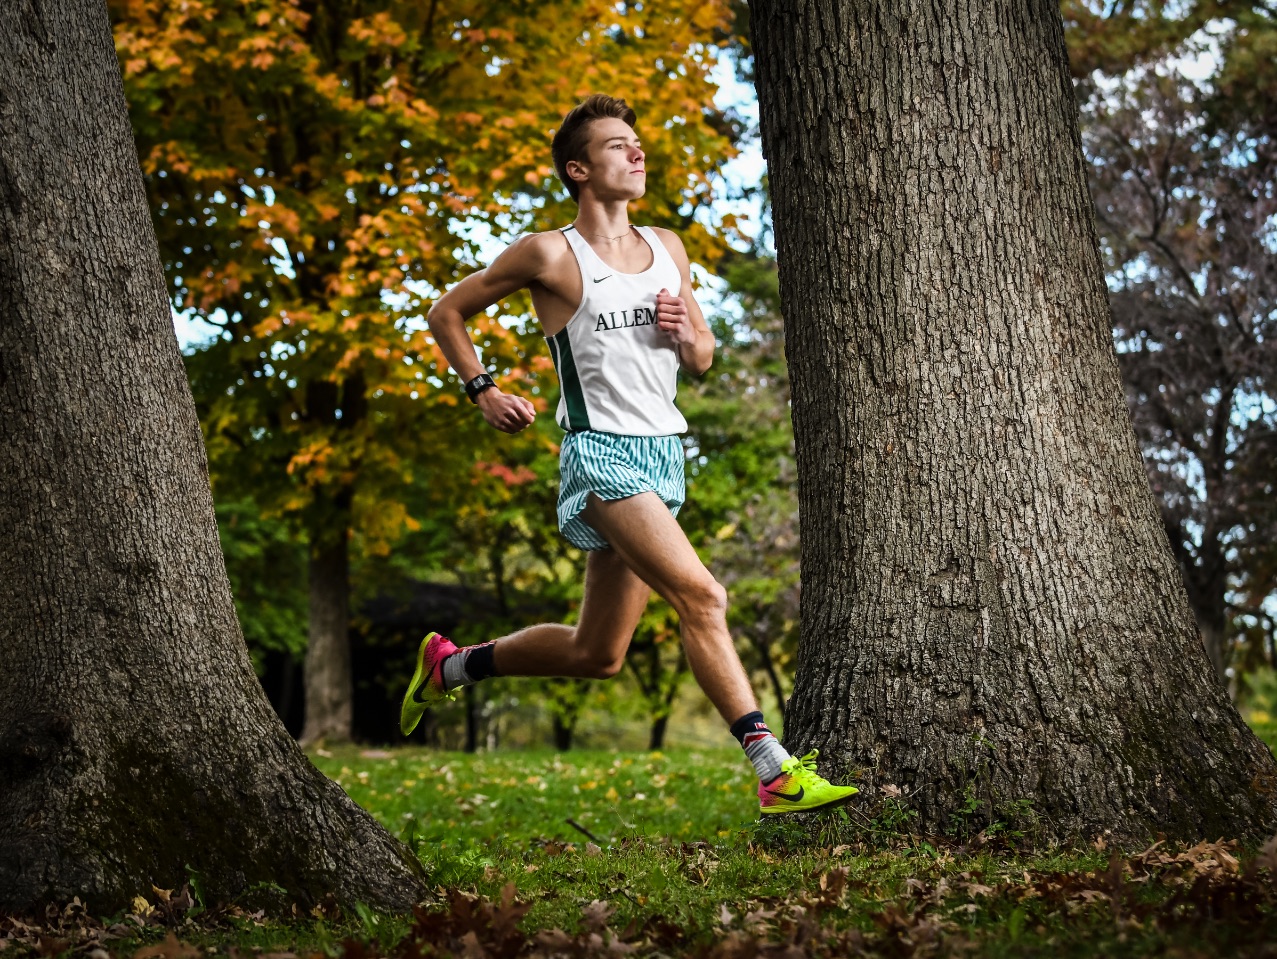 Alleman boys' cross country standout Spencer Smith. (Todd Mizener - Dispatch/Argus)